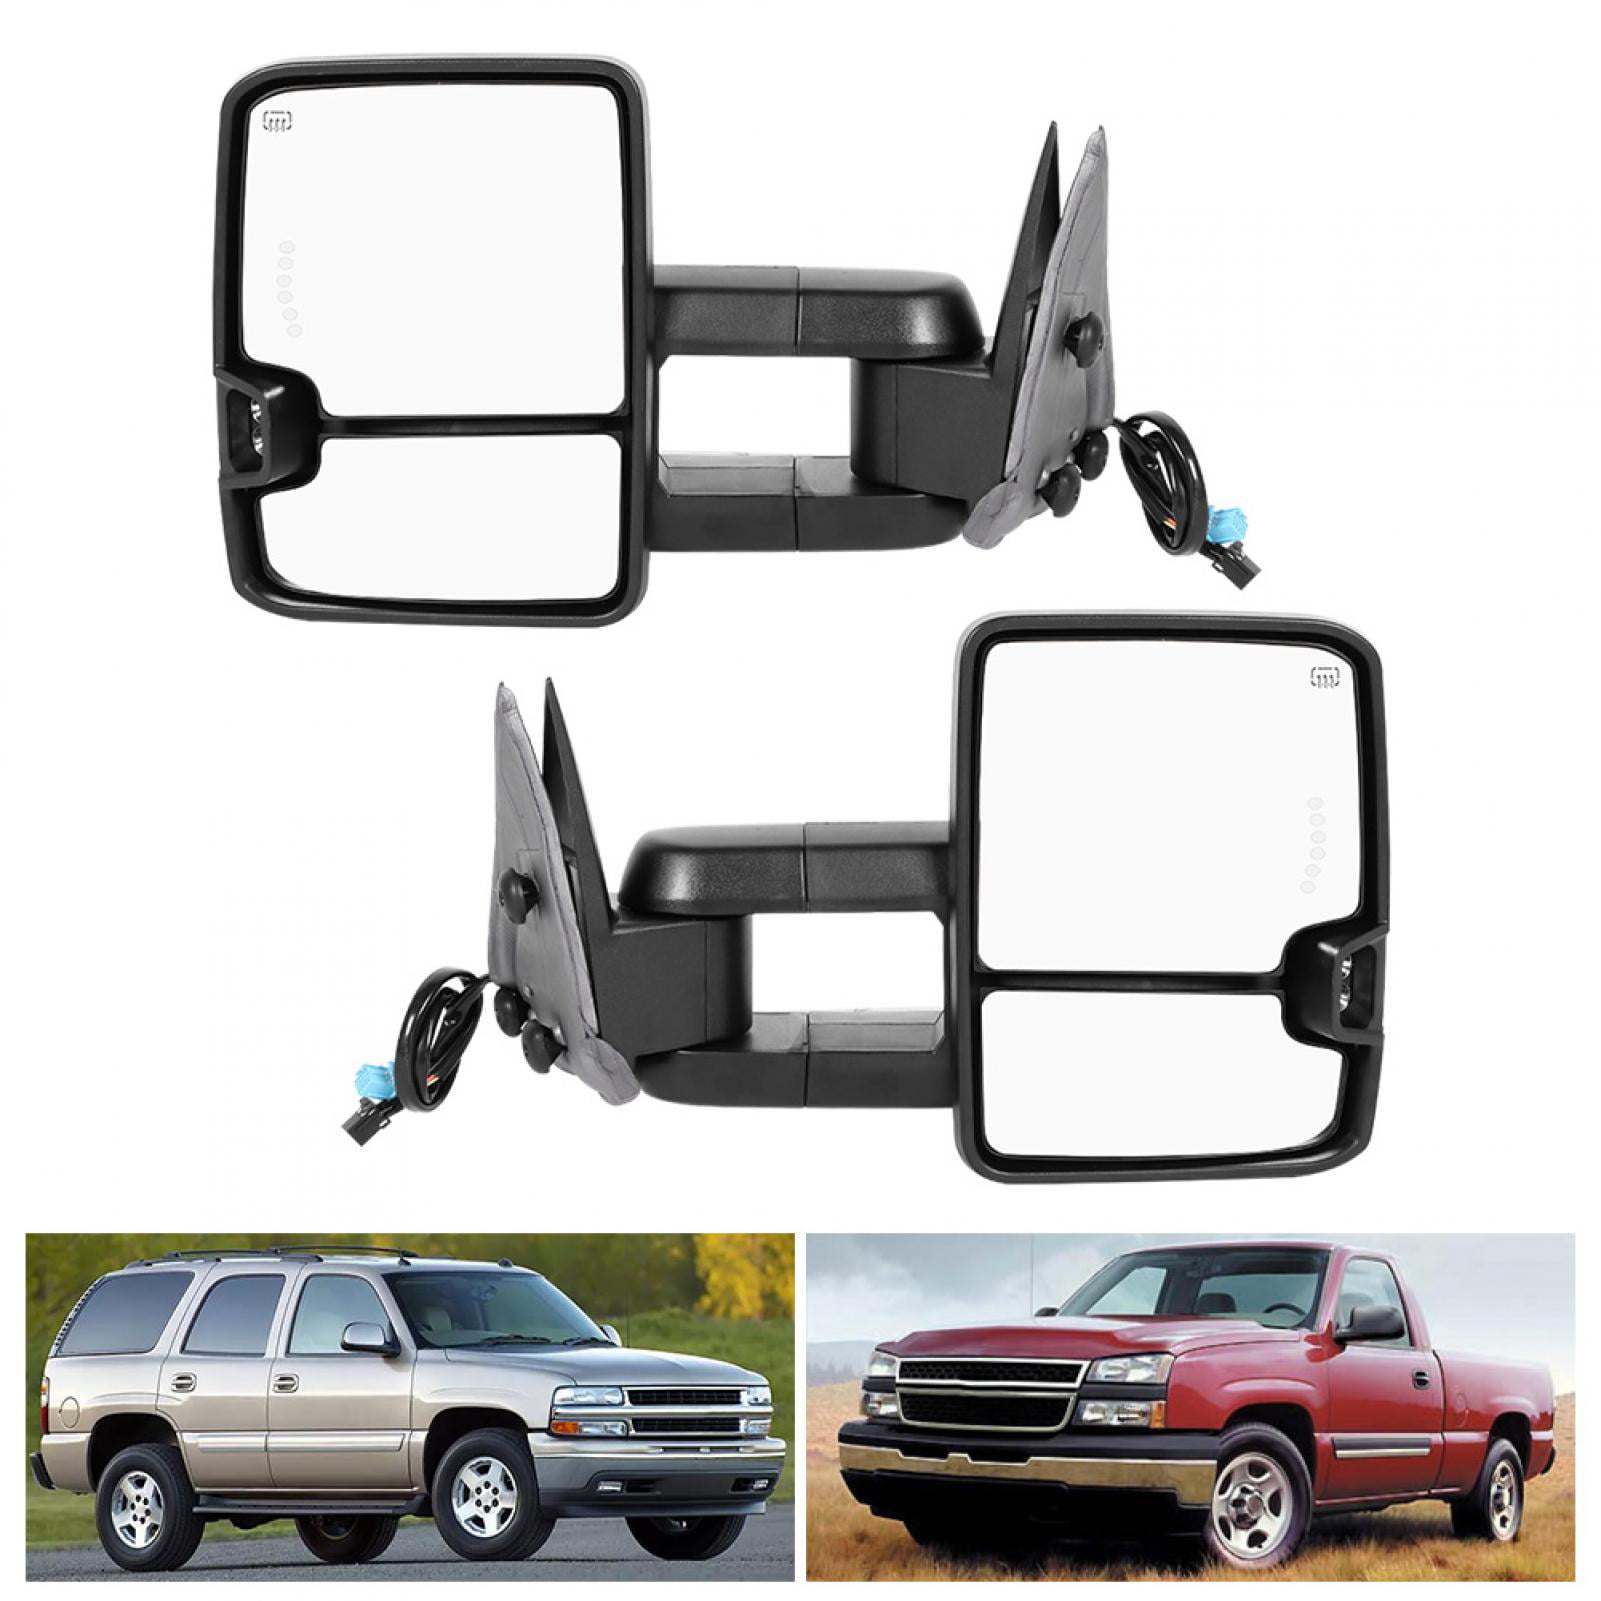 Just Fit 07 Classic Style with Arrow Turn Signal Heated Power Control SCITOO Towing Mirrors,Fit Chevy GMC Exterior Accessories Mirrors fit 2003-2006 Chevy Silverado/Suburban/Sierra 1500 2500 3500 